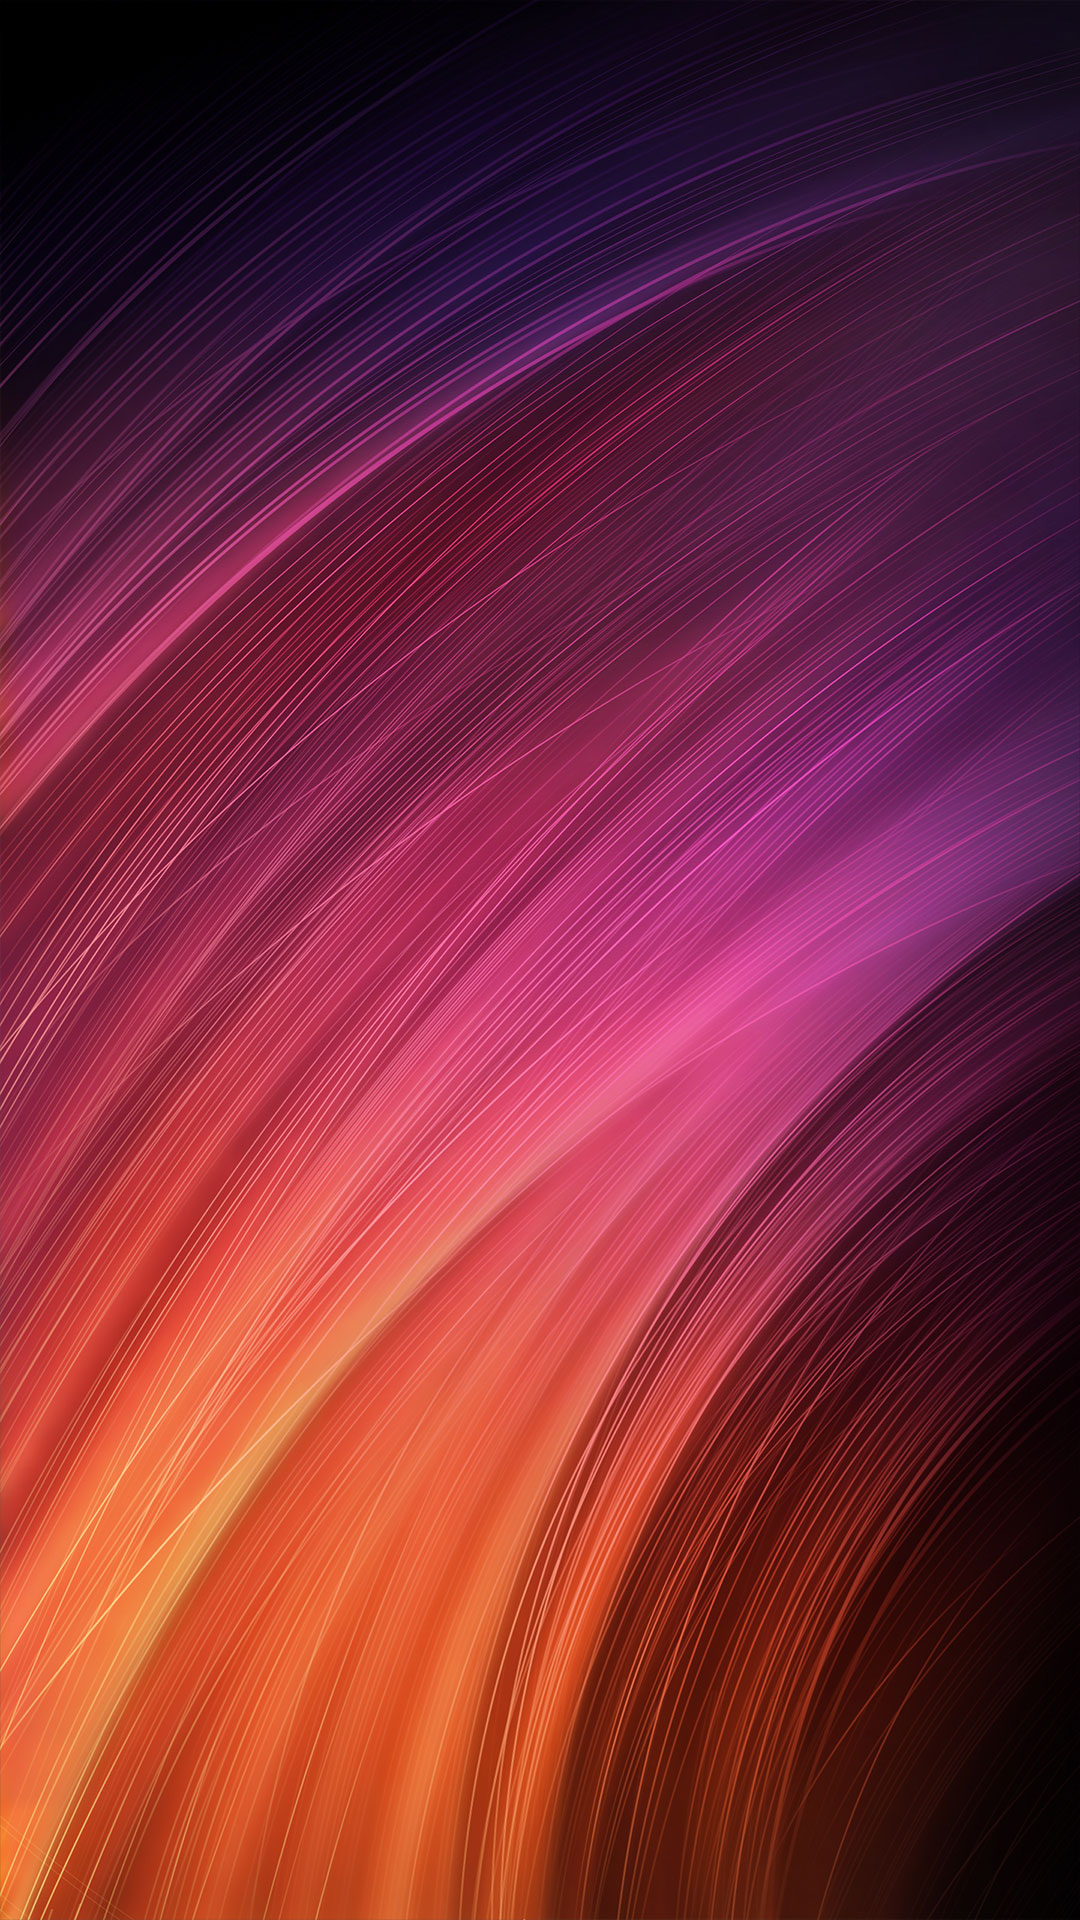 MIUI 12 Super Wallpapers Download and install on any device